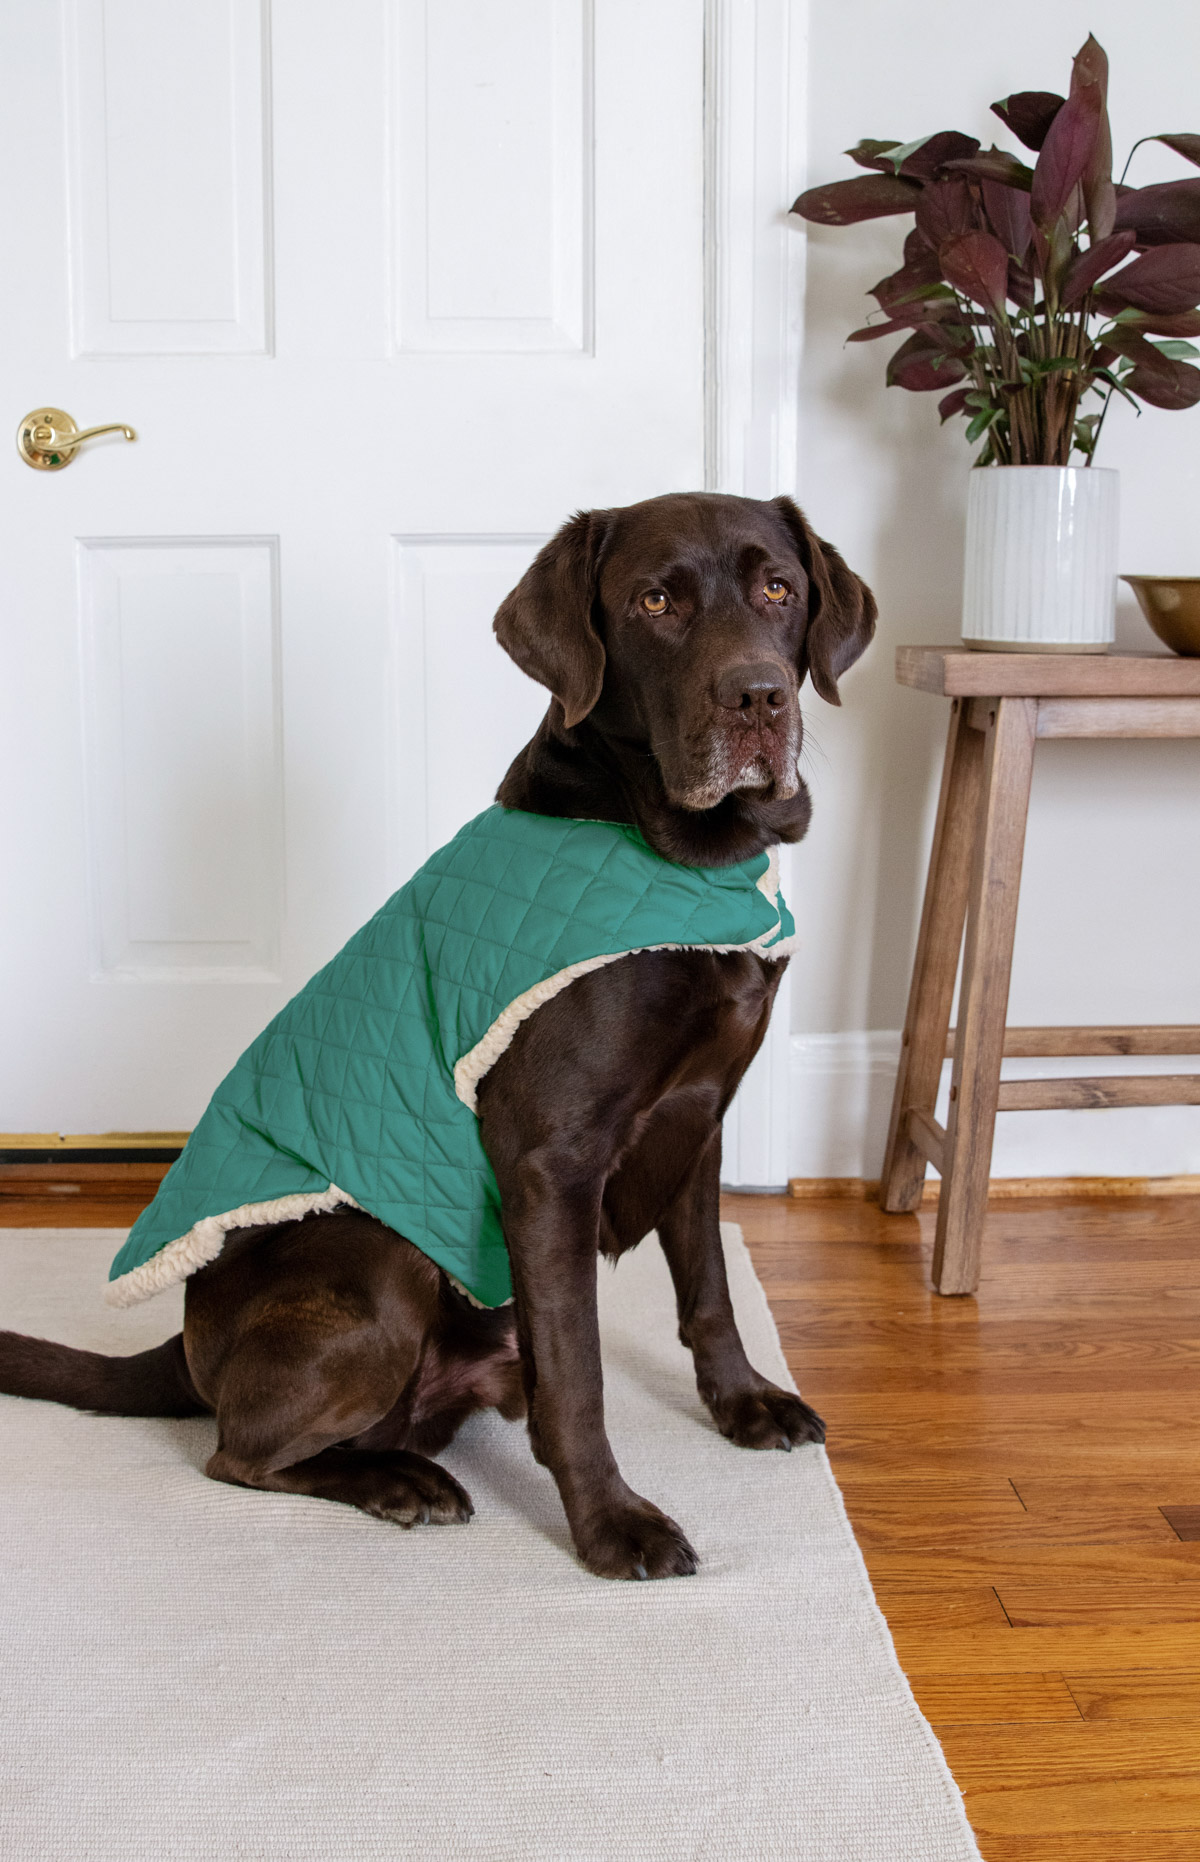 This DIY dog coat is made with ultrasoft fleece on the inside and easy-to-clean cotton on the outside to keep your pup comfy in cold weather.